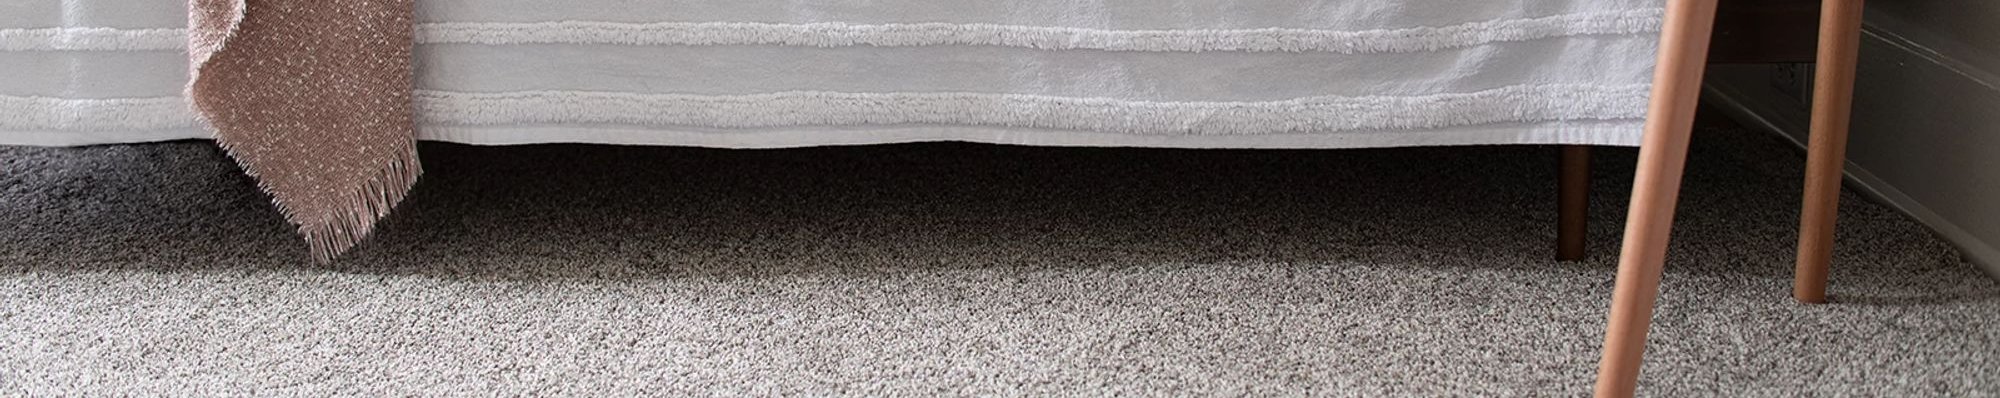 Learn more about Cawood's Carpet in West Chester.